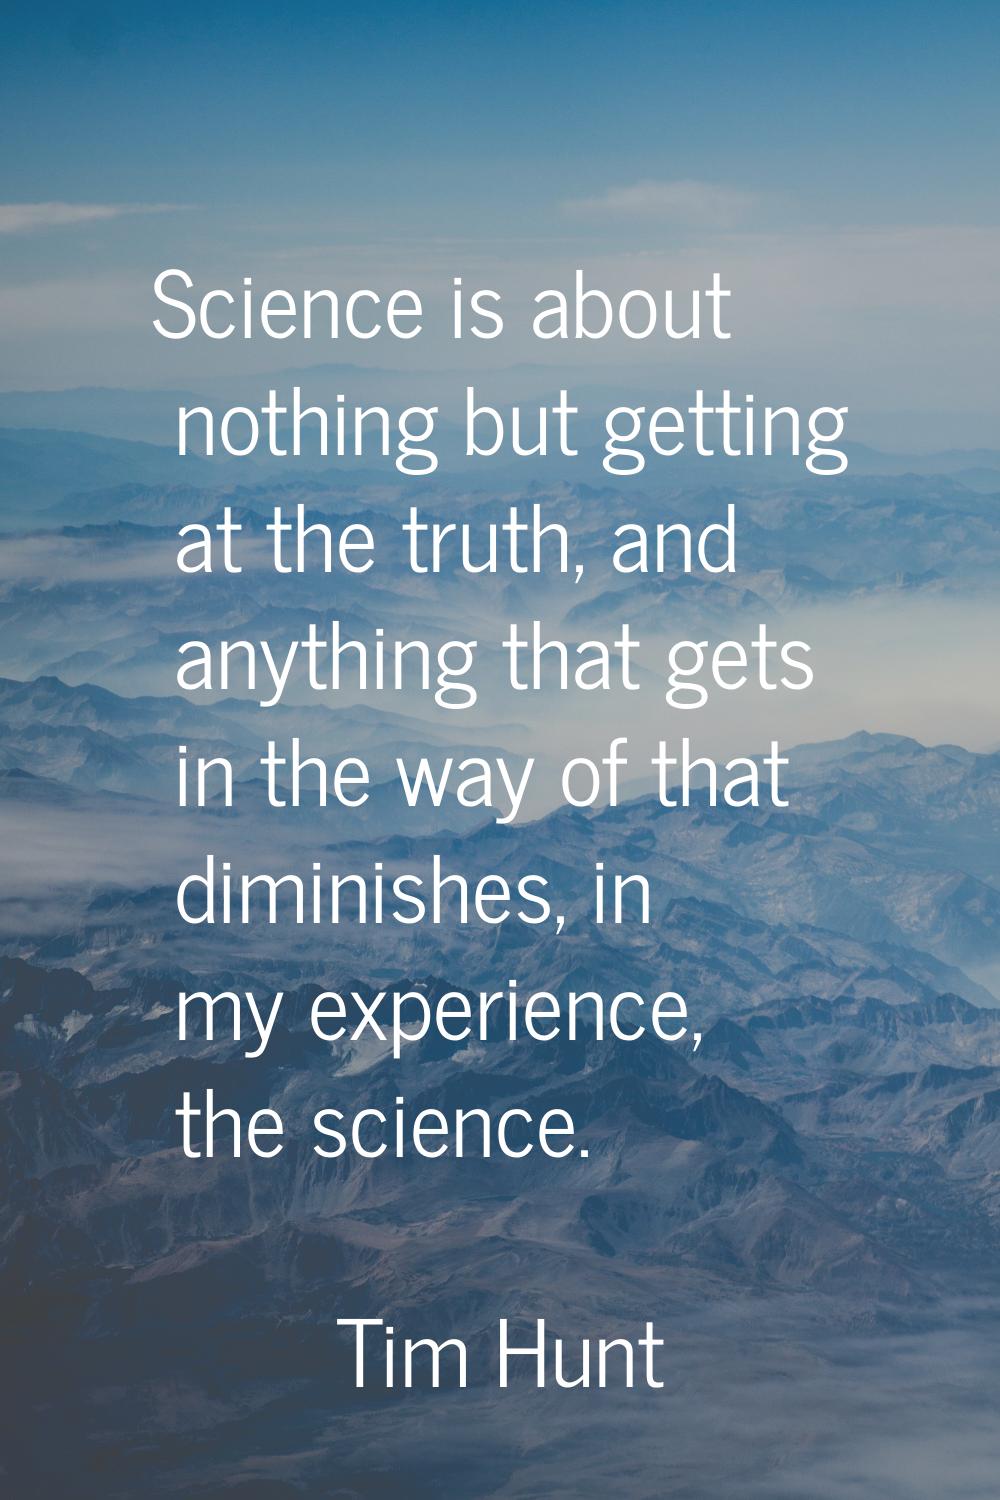 Science is about nothing but getting at the truth, and anything that gets in the way of that dimini